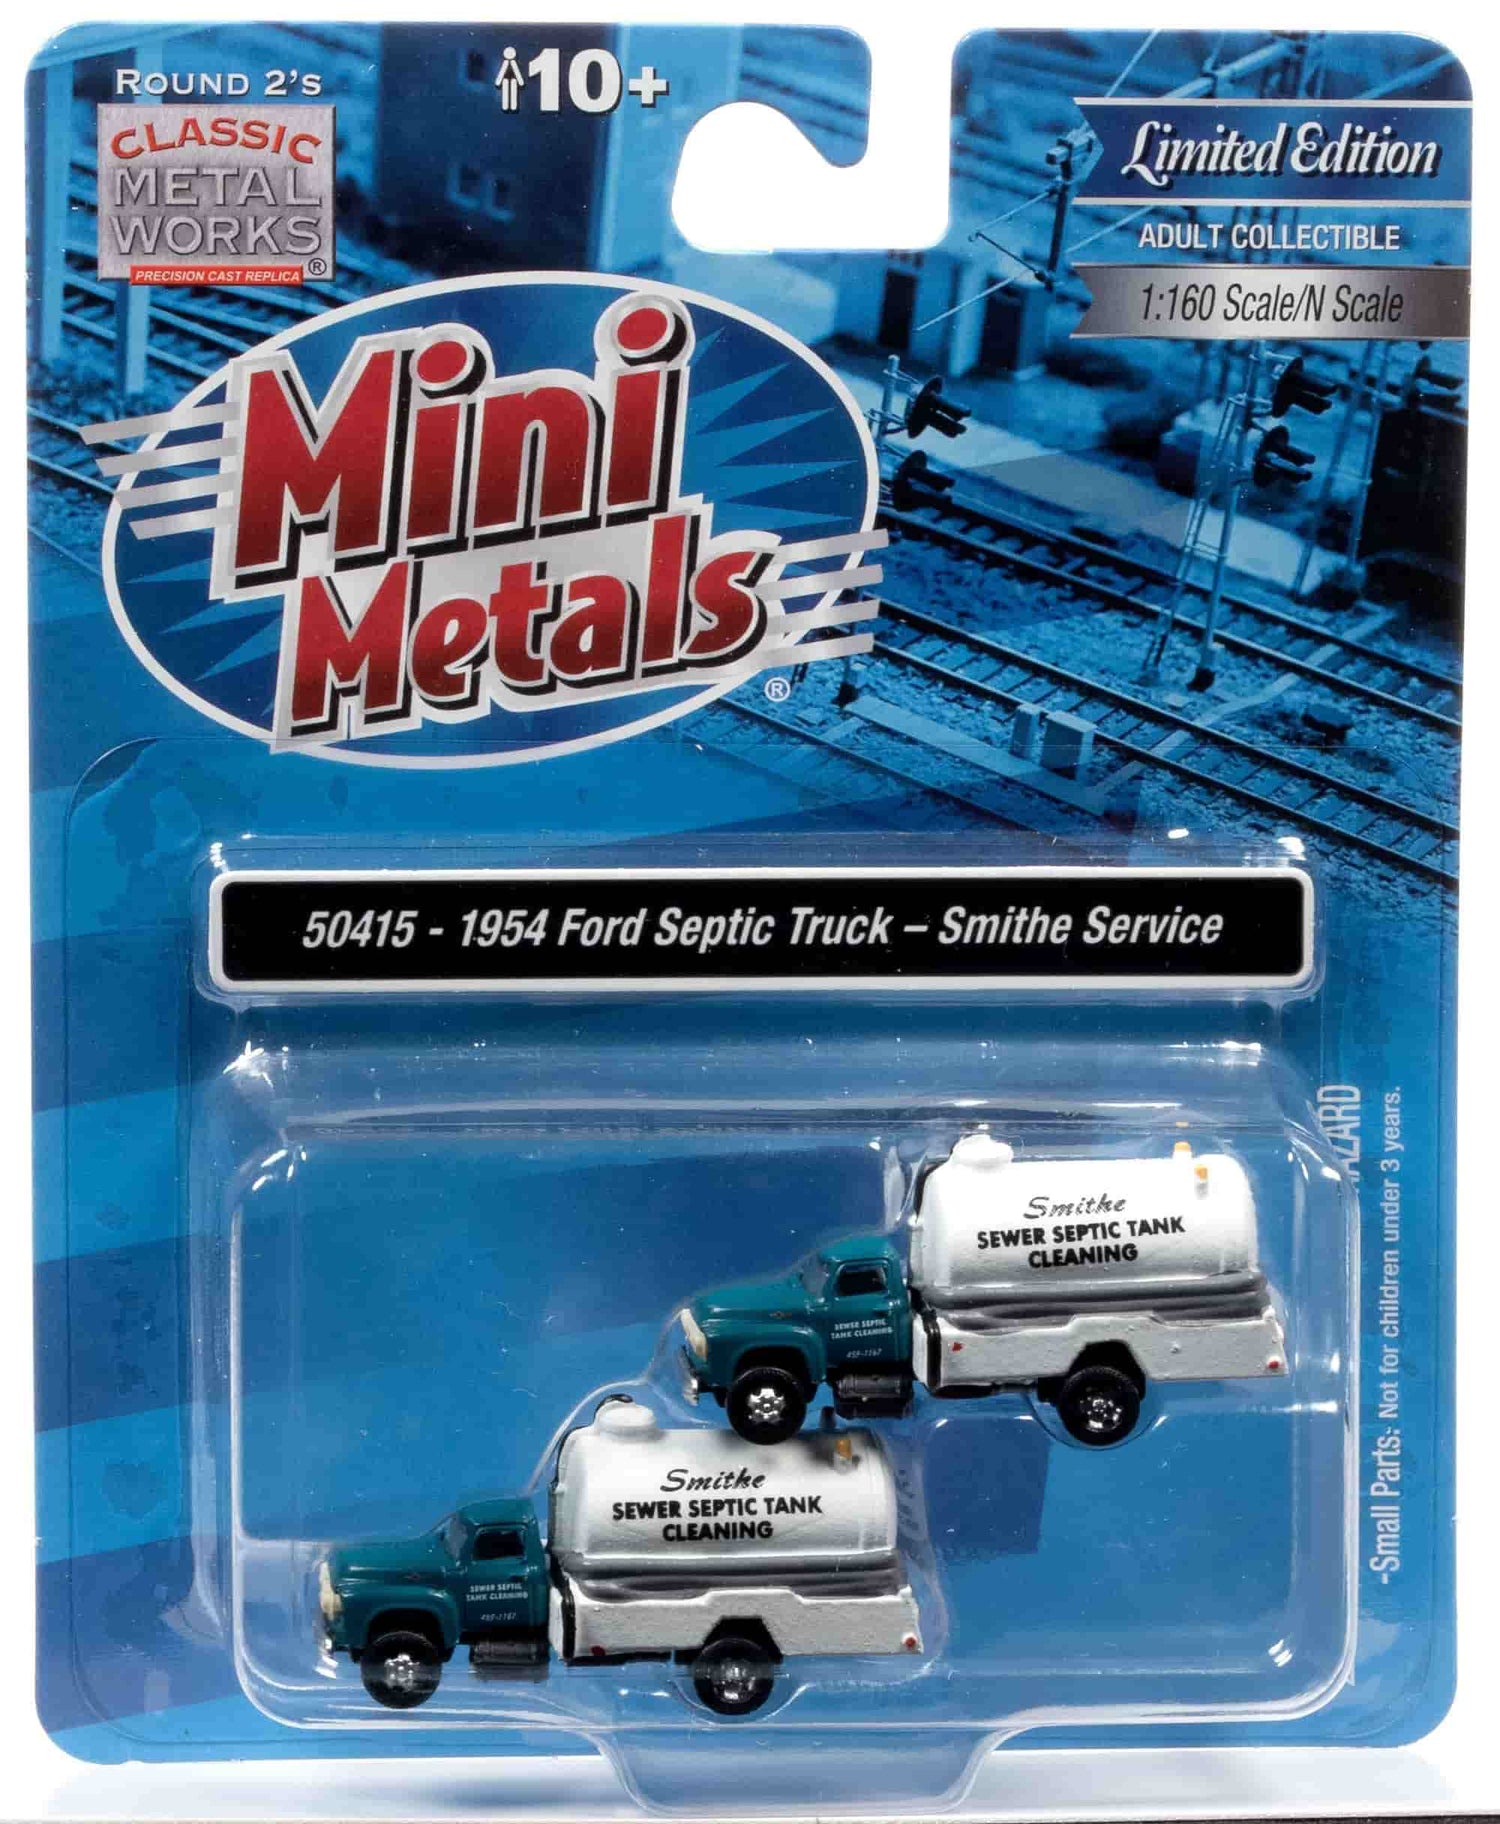 Classic Metal Works 1954 Ford Septic Tank Truck (Smithe Septic Service) (2-Pack) 1:160 N Scale